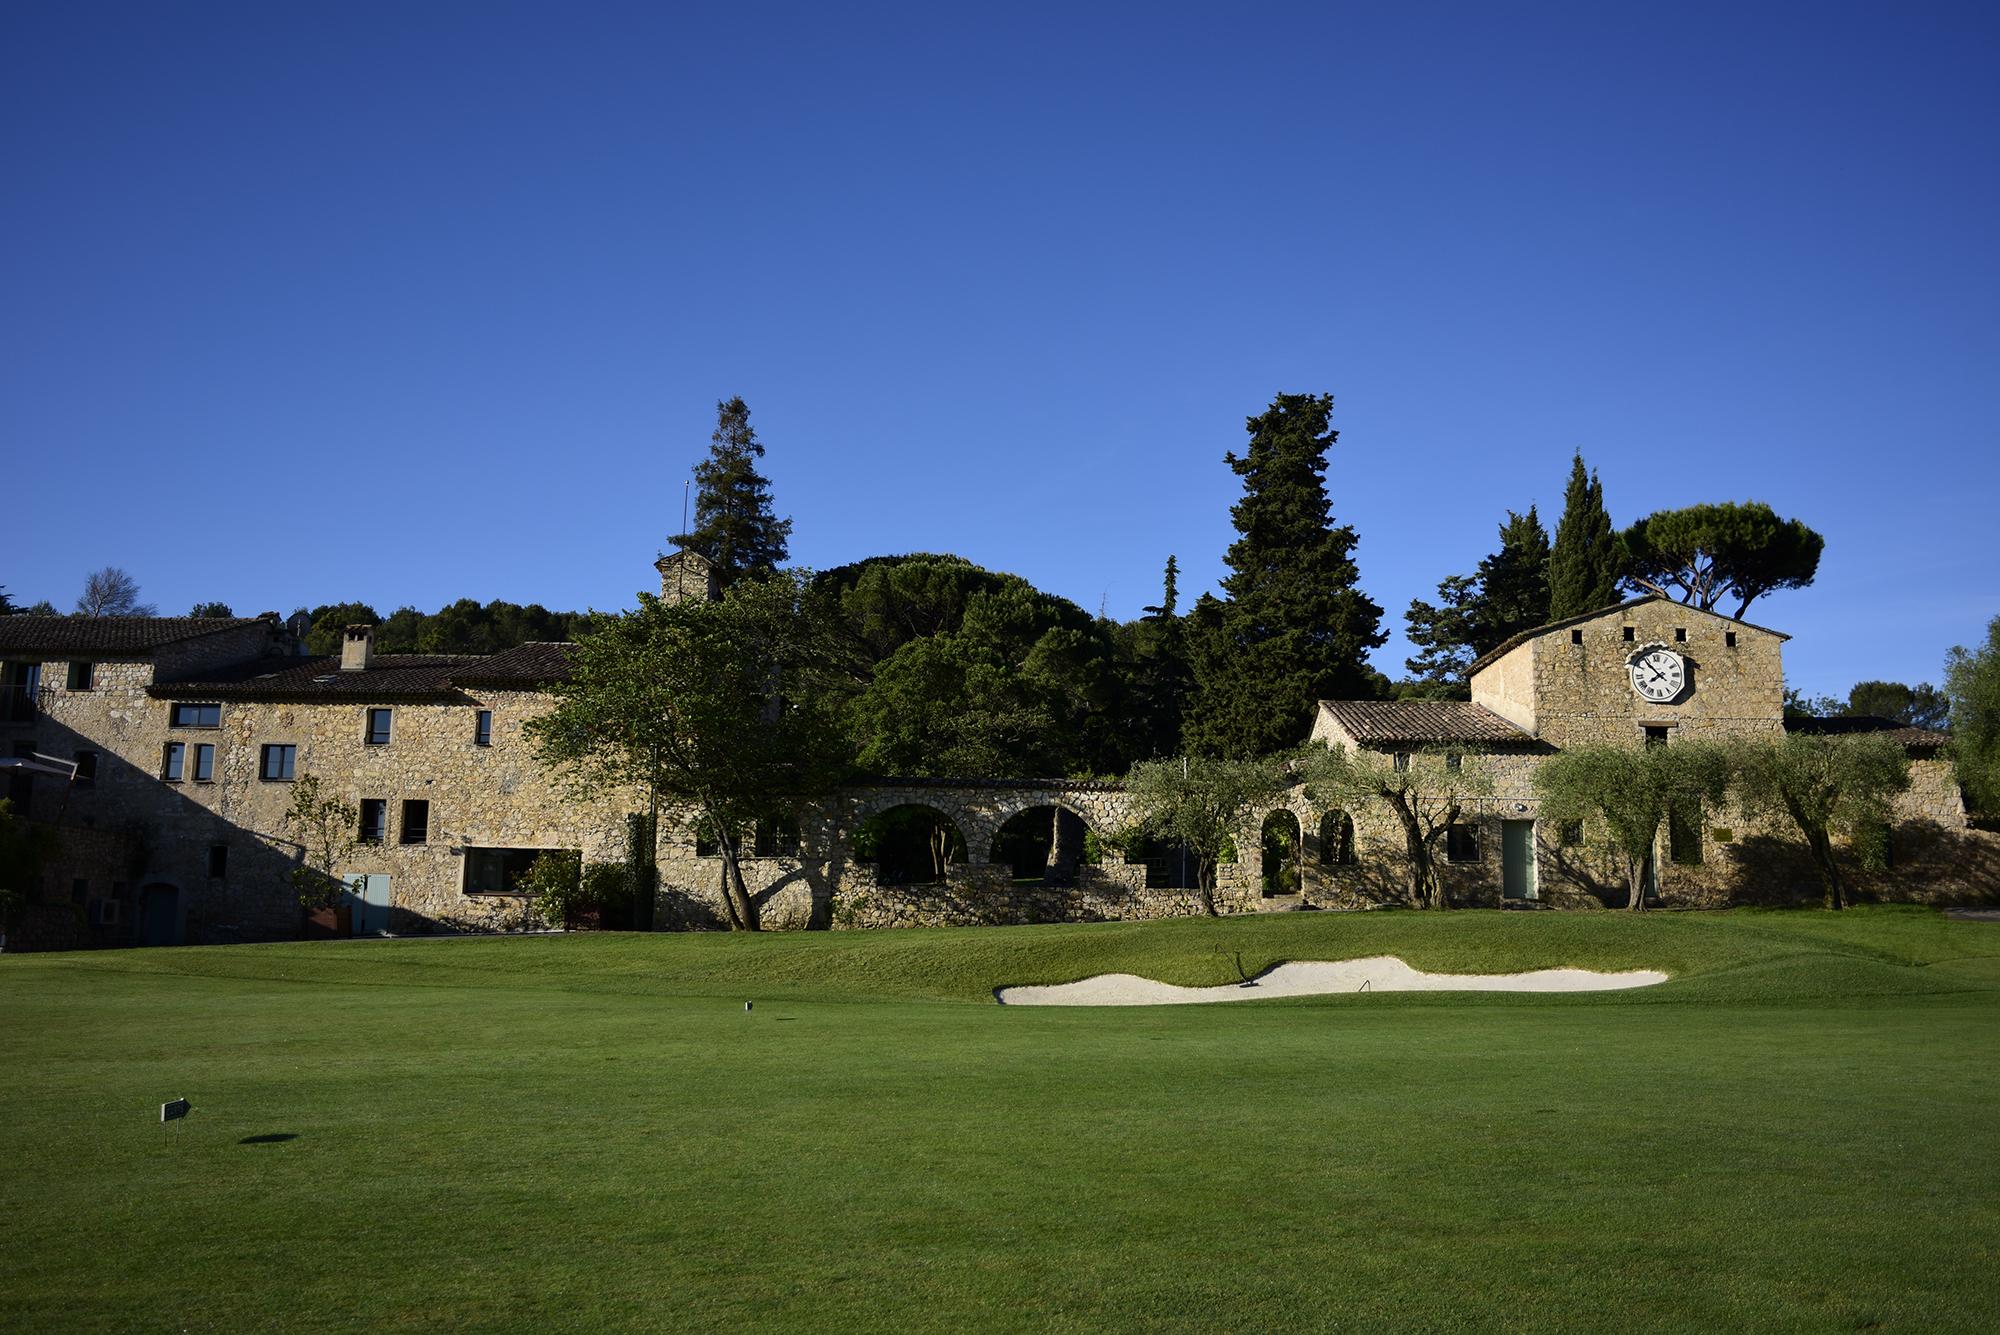 The Golf Country Club Cannes Mougins's lovely golf course situated in brilliant South of France.